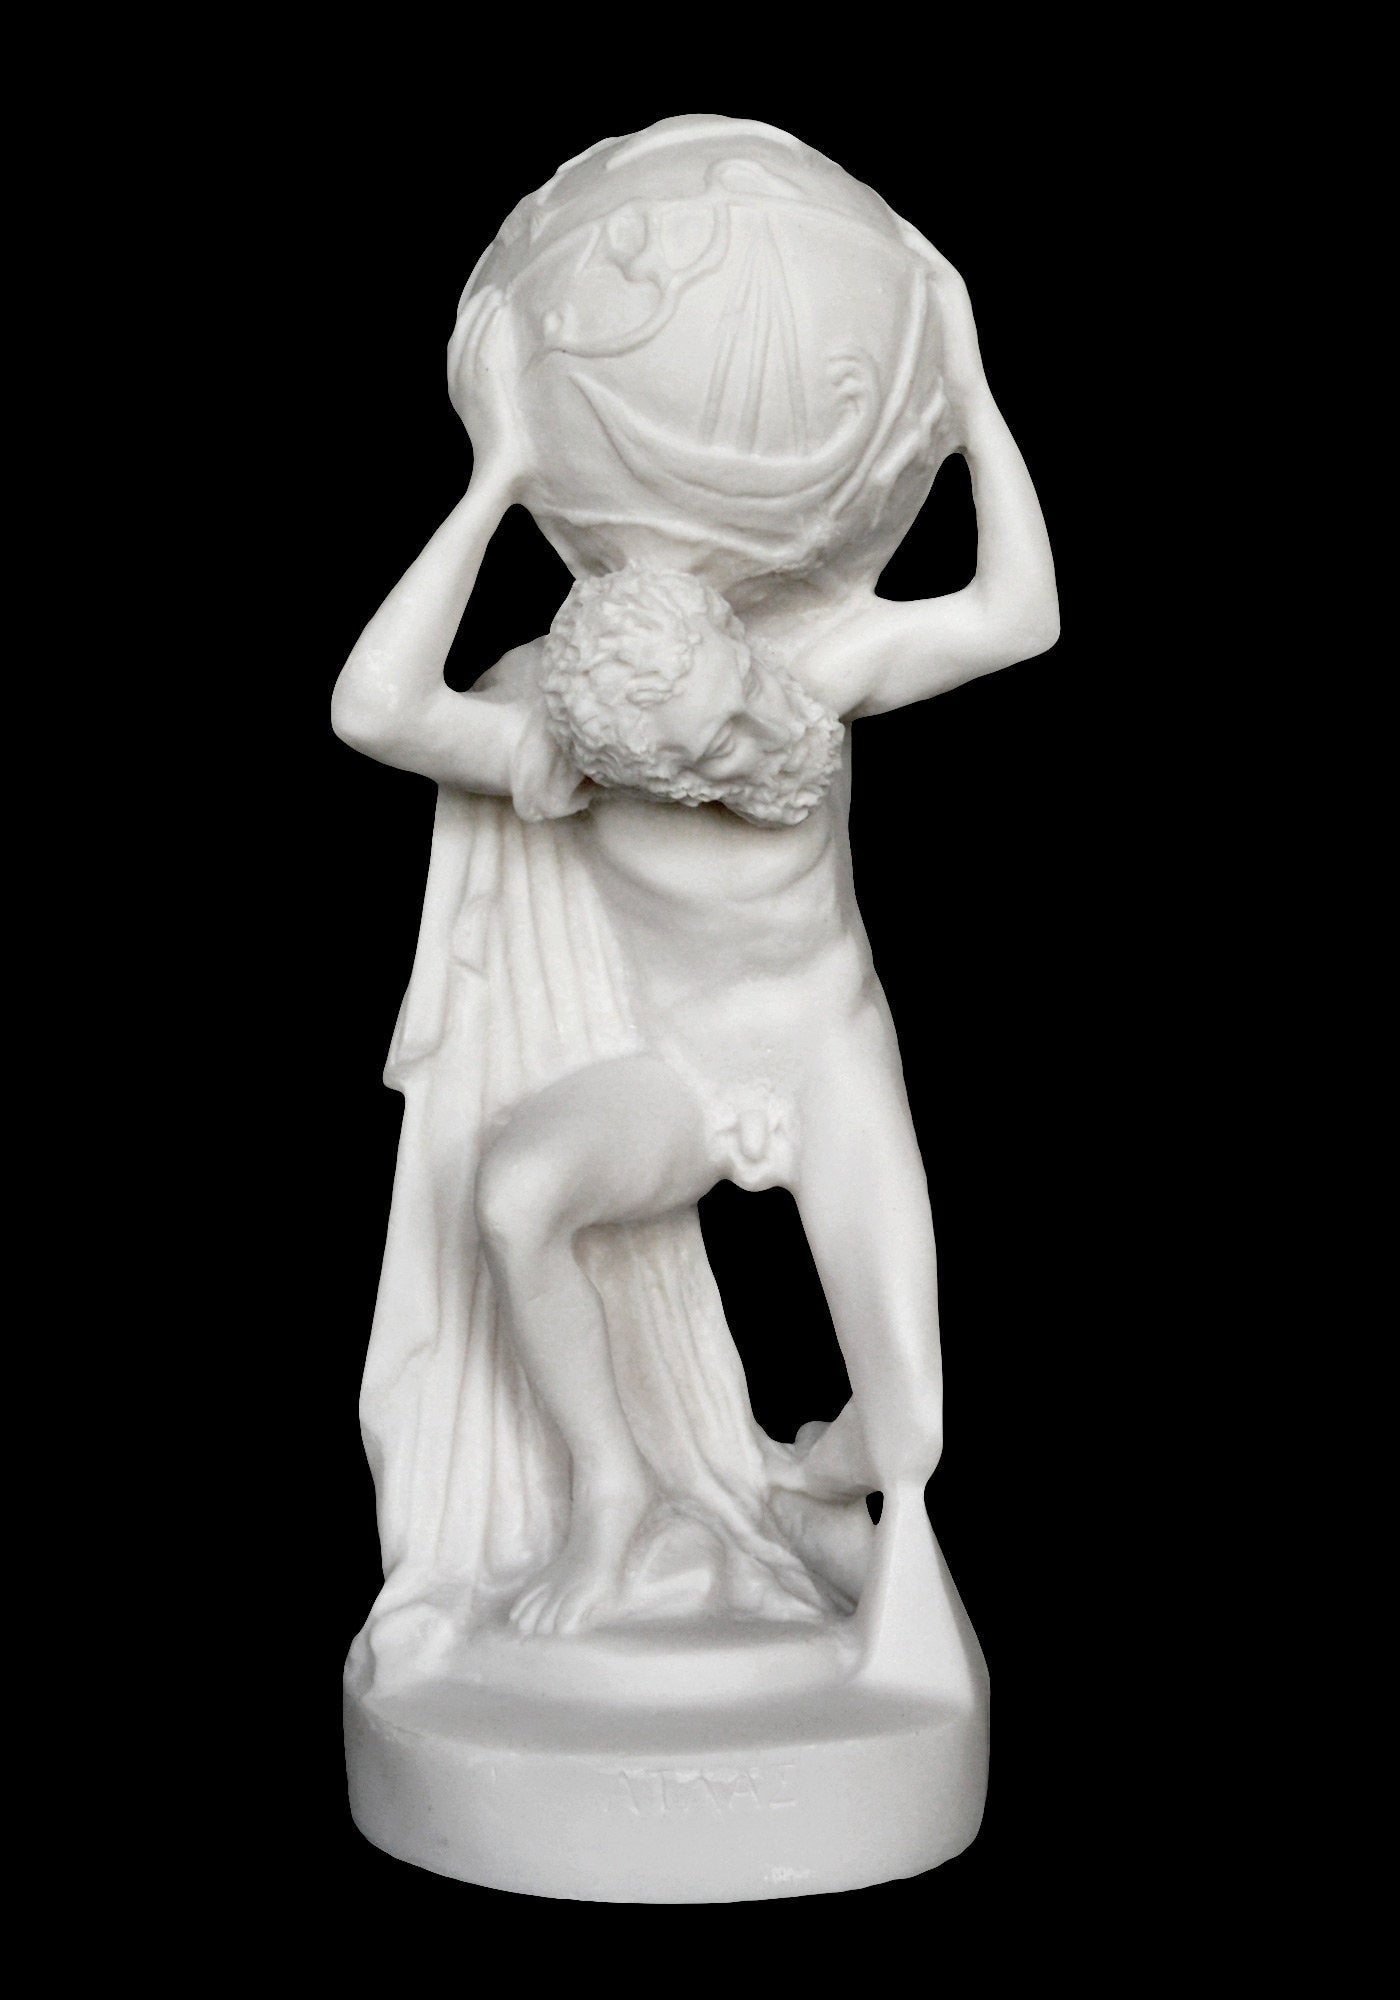 Atlas - Iapetus’ son - Leader of the Titan Rebellion against Zeus - Condemned to eternally hold up the Sky - Alabaster Statue Sculpture